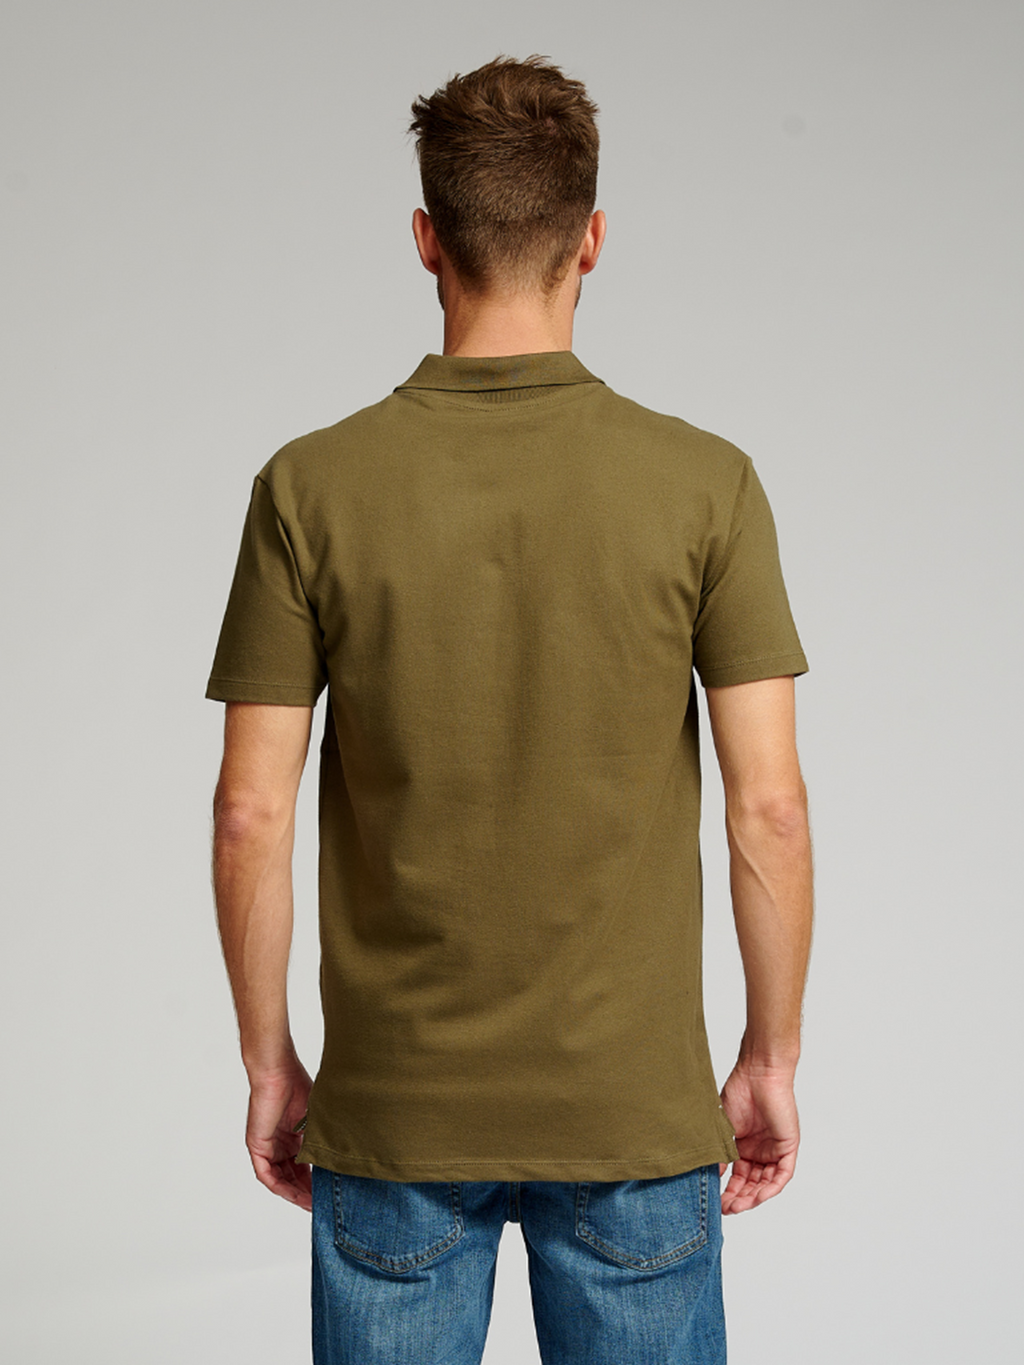 Muscle Polo Shirt - Army Green